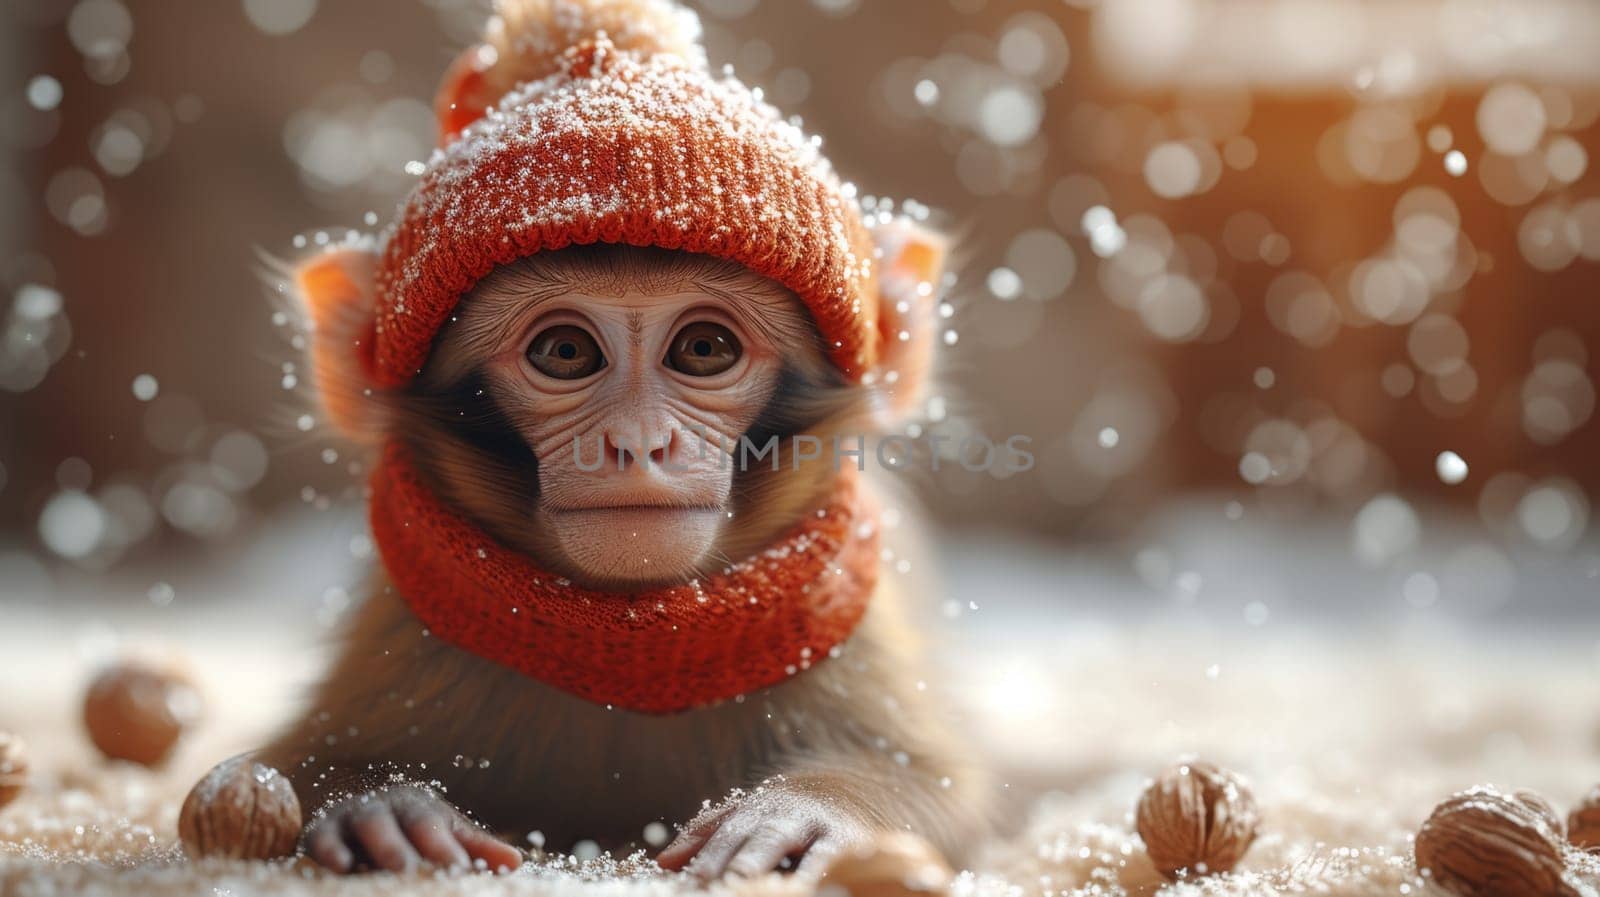 Funny monkey in a warm hat sitting in a home interior by Lobachad